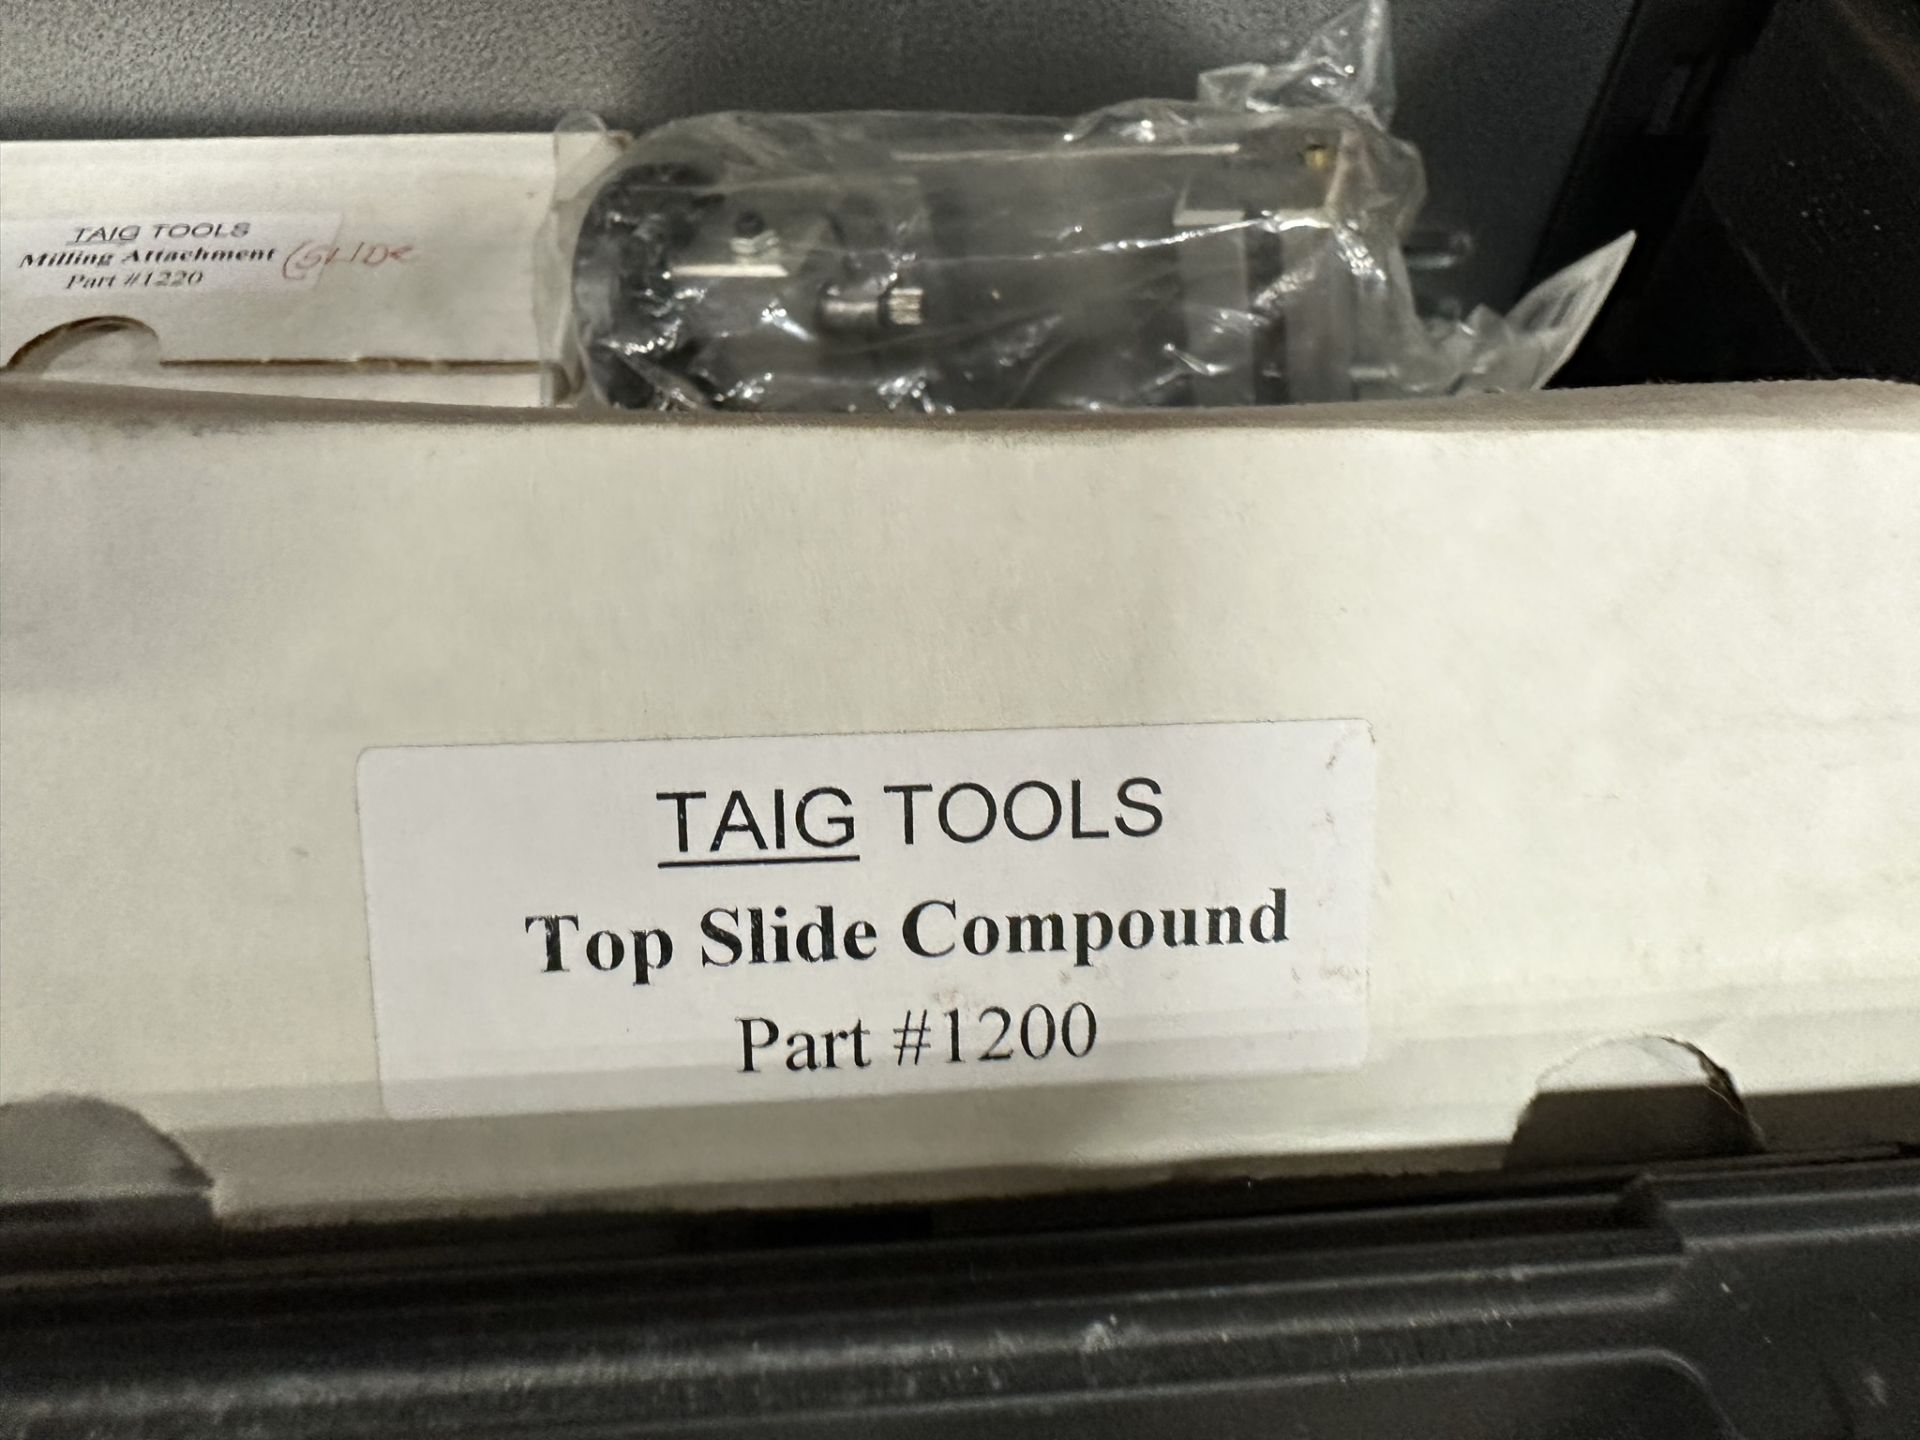 TAIG TOOLS BENCH MOUNT PEN LATHE, 3/4" SPINDLE, MILL SPINDLE ER16 COLLET 22X1.5MM, TURNING CHISELS, - Image 13 of 18